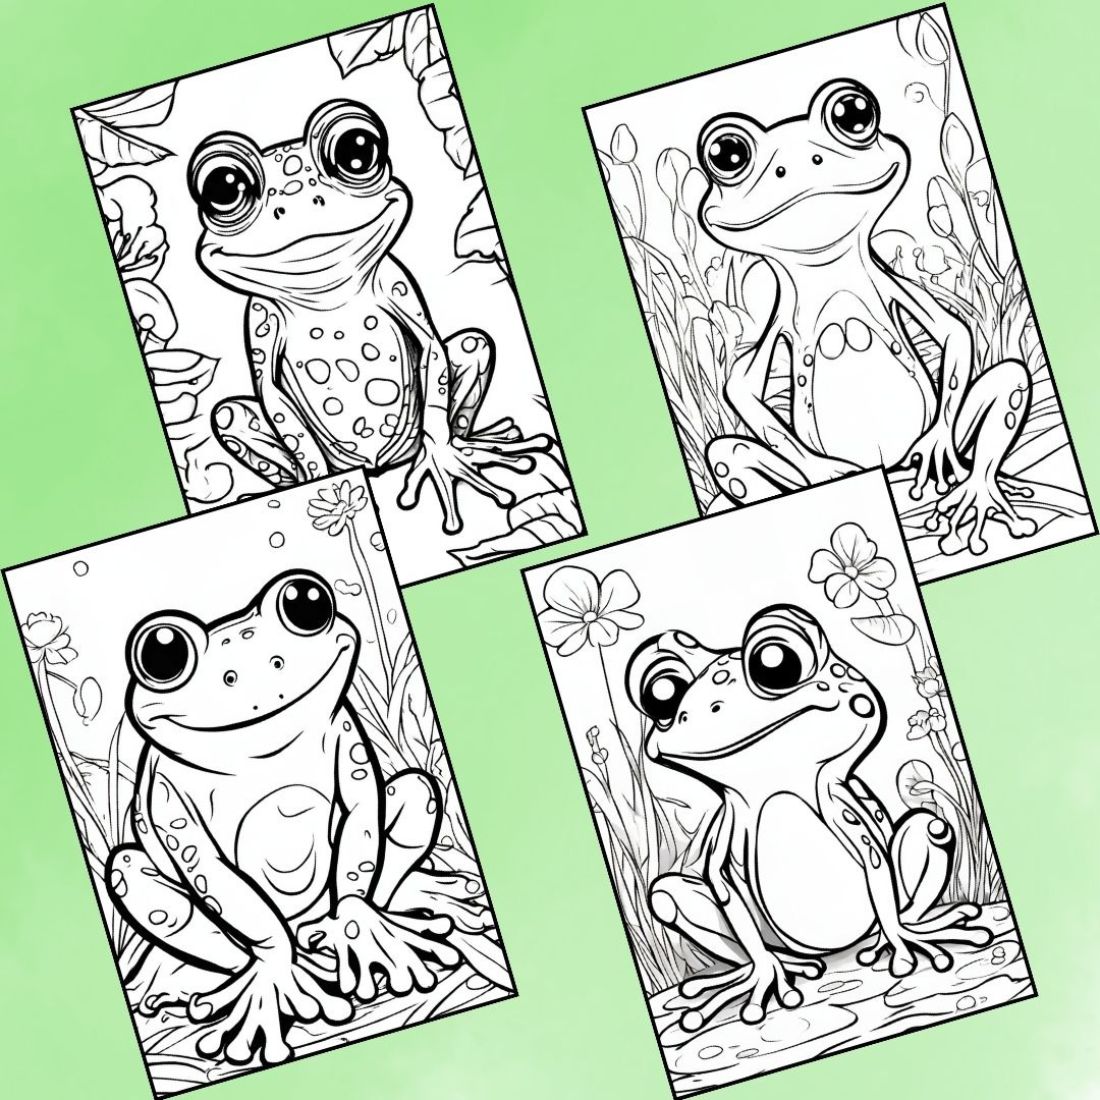 Froggy Coloring Adventure | 12 Relaxing and Calming Frog Coloring Pages for Kids preview image.